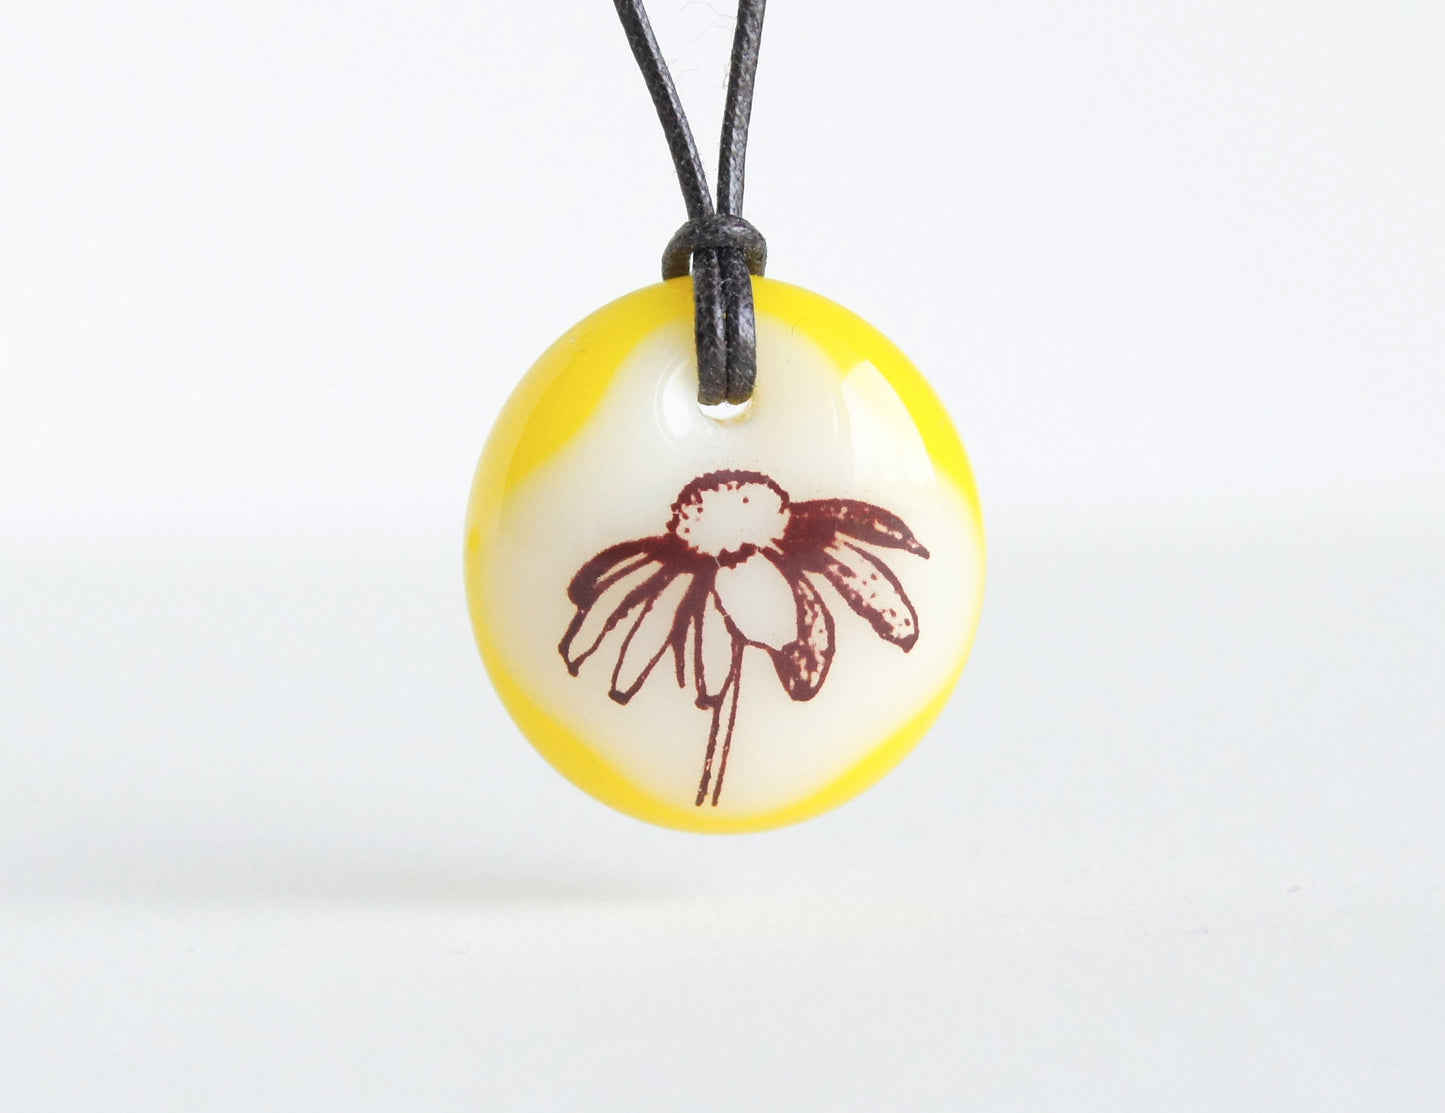 Flower necklace in sunflower yellow, handmade in glass